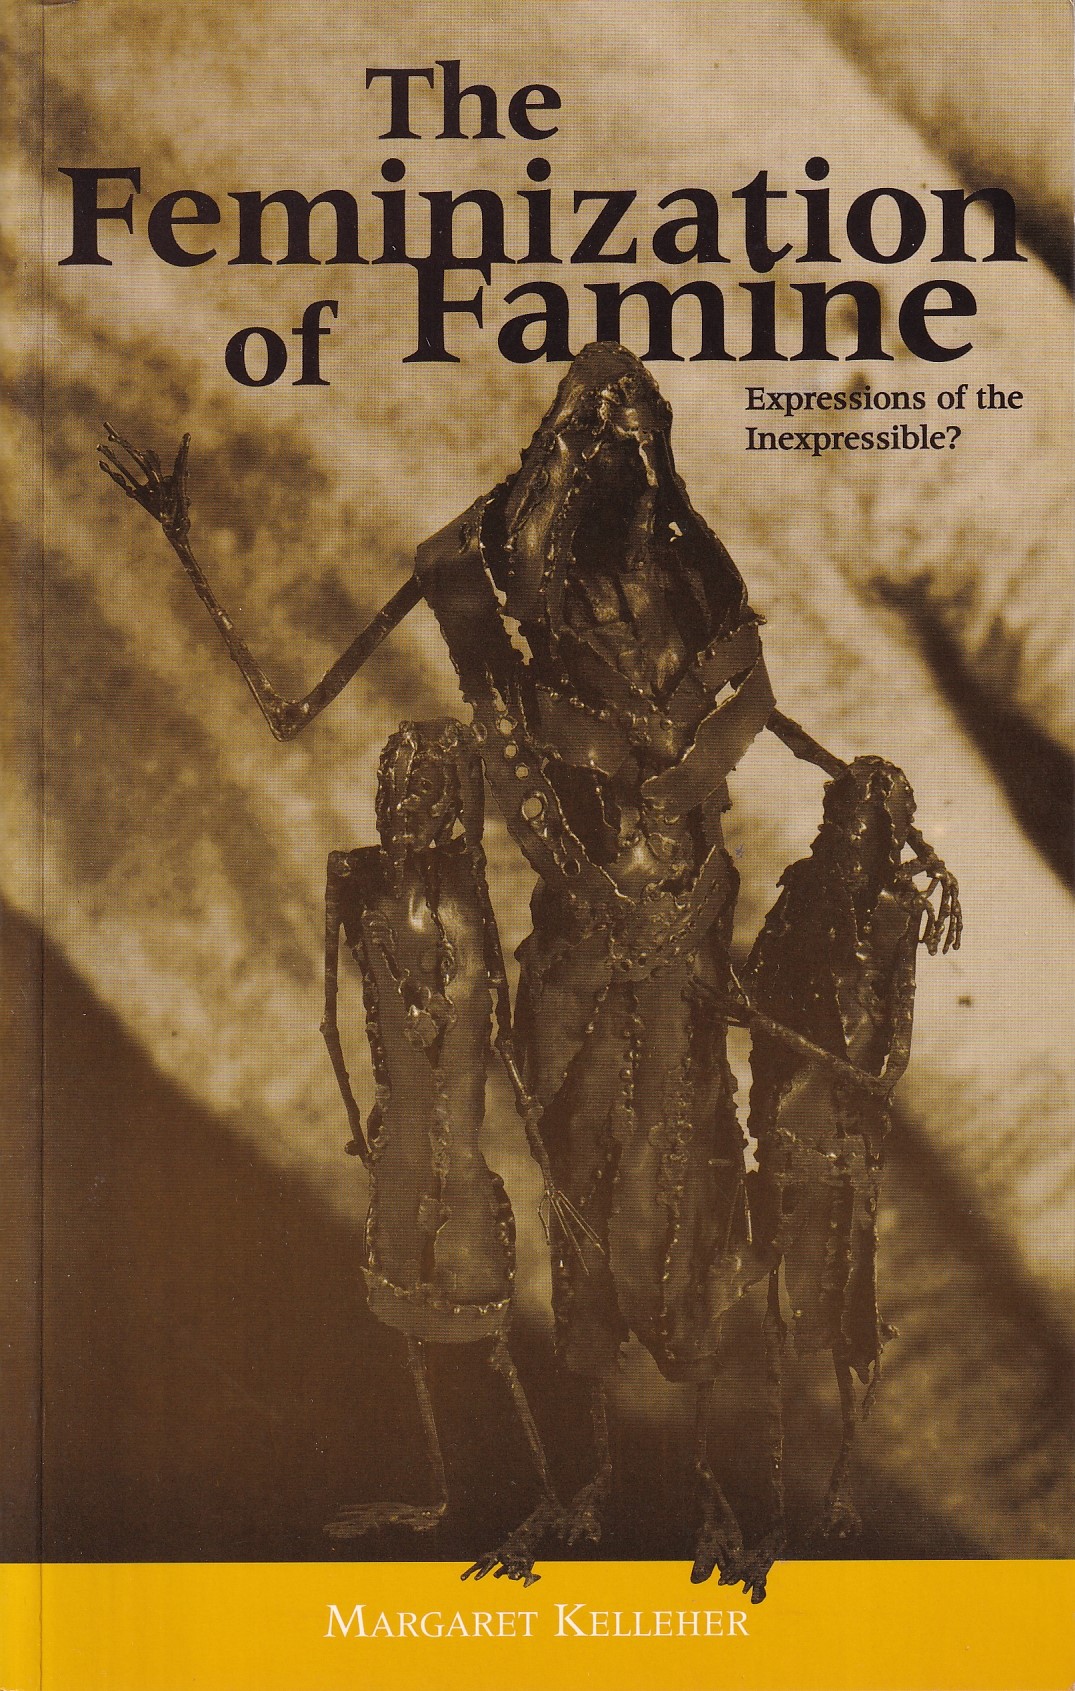 Feminization of Famine: Expressions of the Inexpressible? by Margaret Kelleher